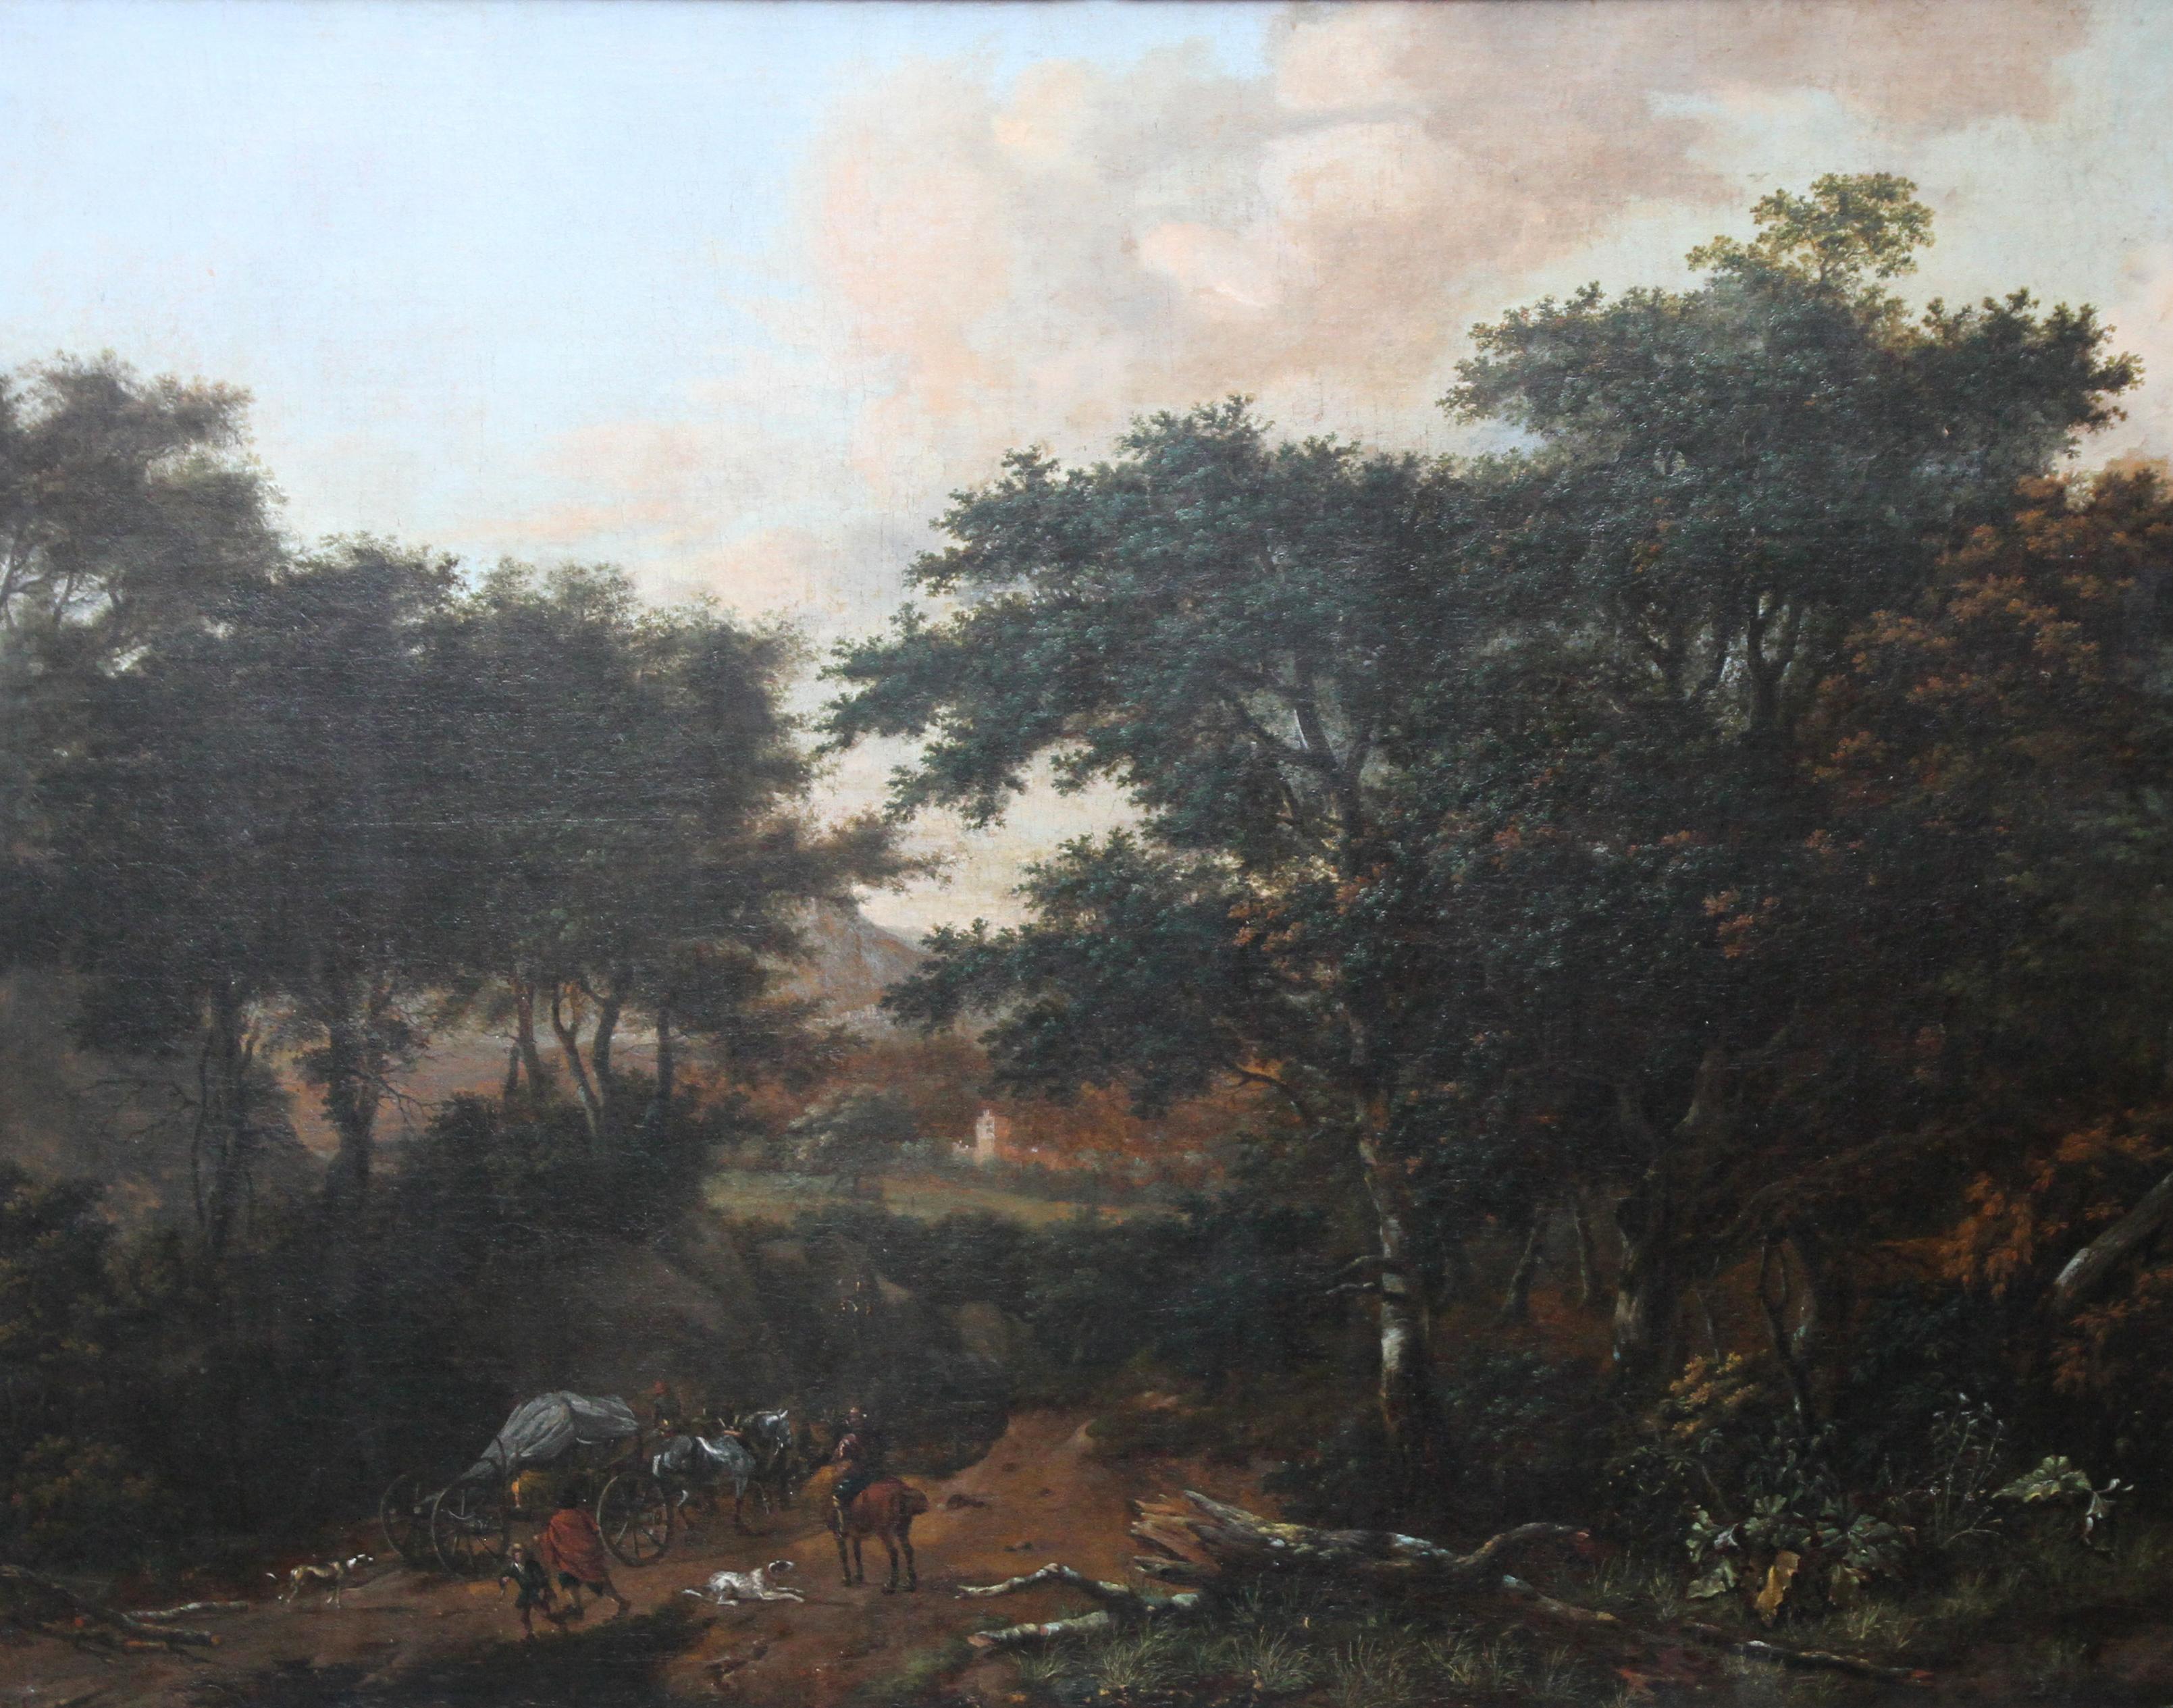 Travellers in Wooded Landscape - Dutch 17th century art Old Master oil painting For Sale 5